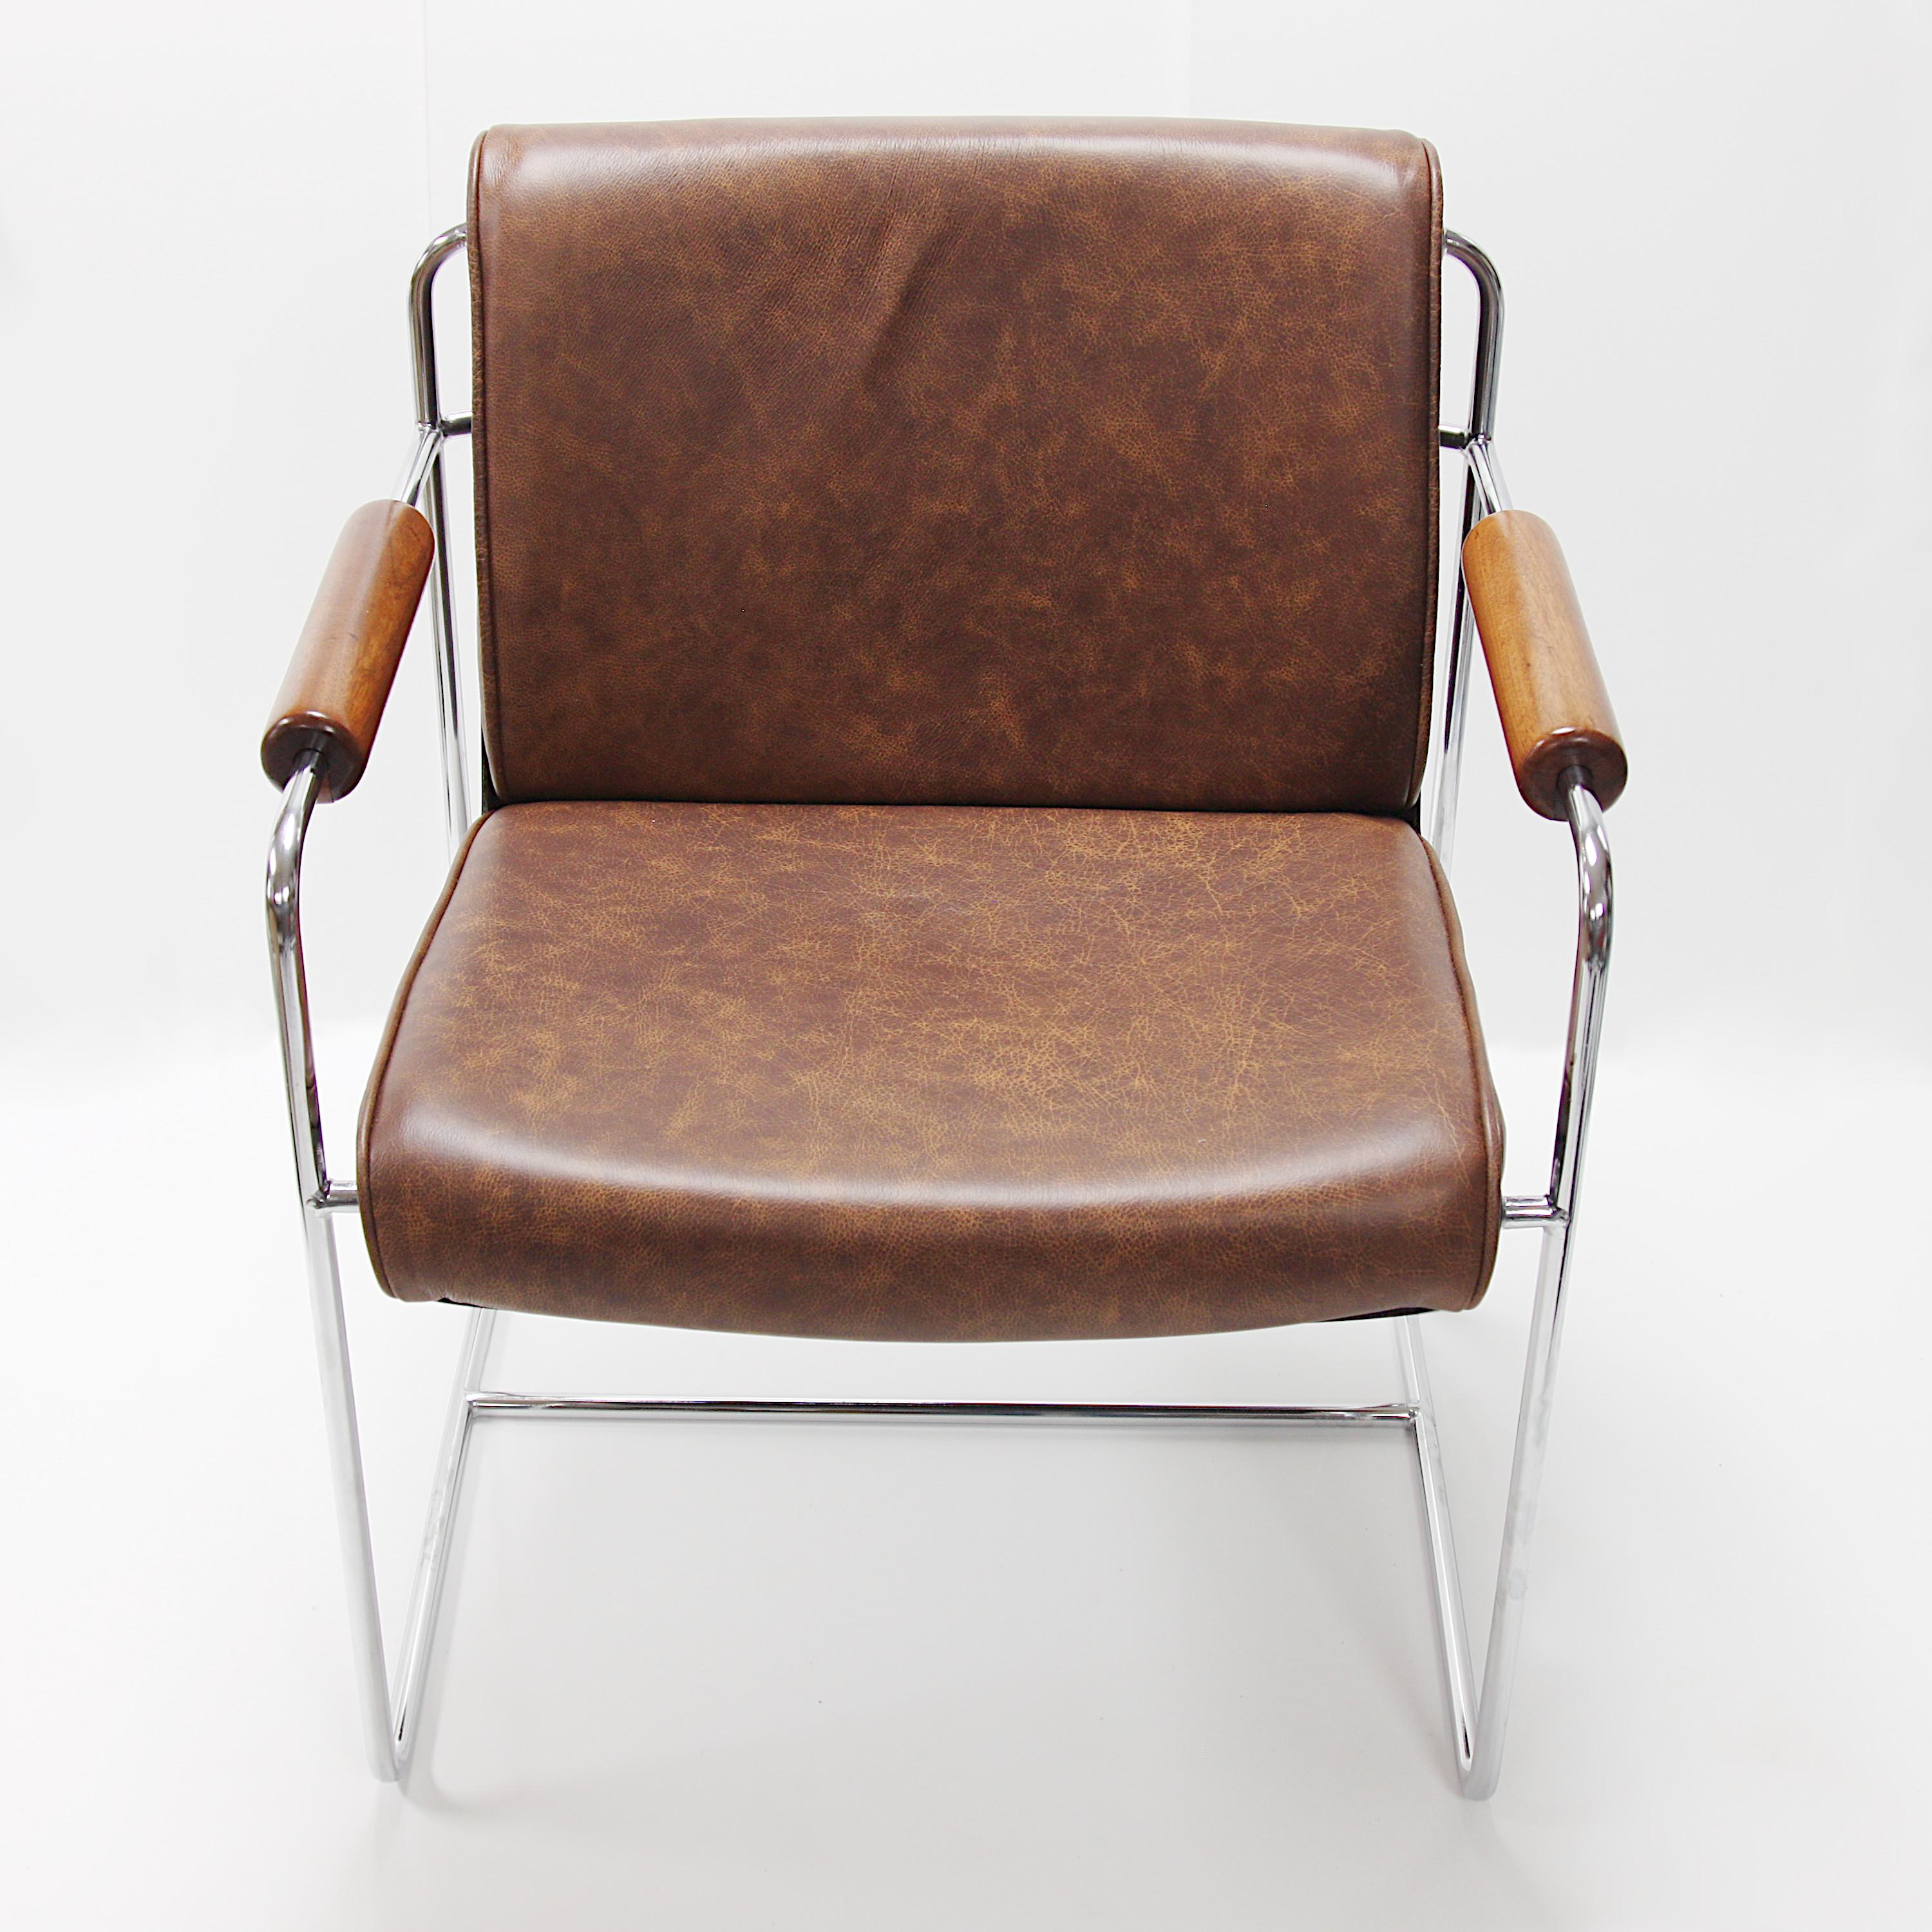 Rare Pair of Mid-Century Modern Fiberglass and Brown Leather Shell Lounge Chairs For Sale 1